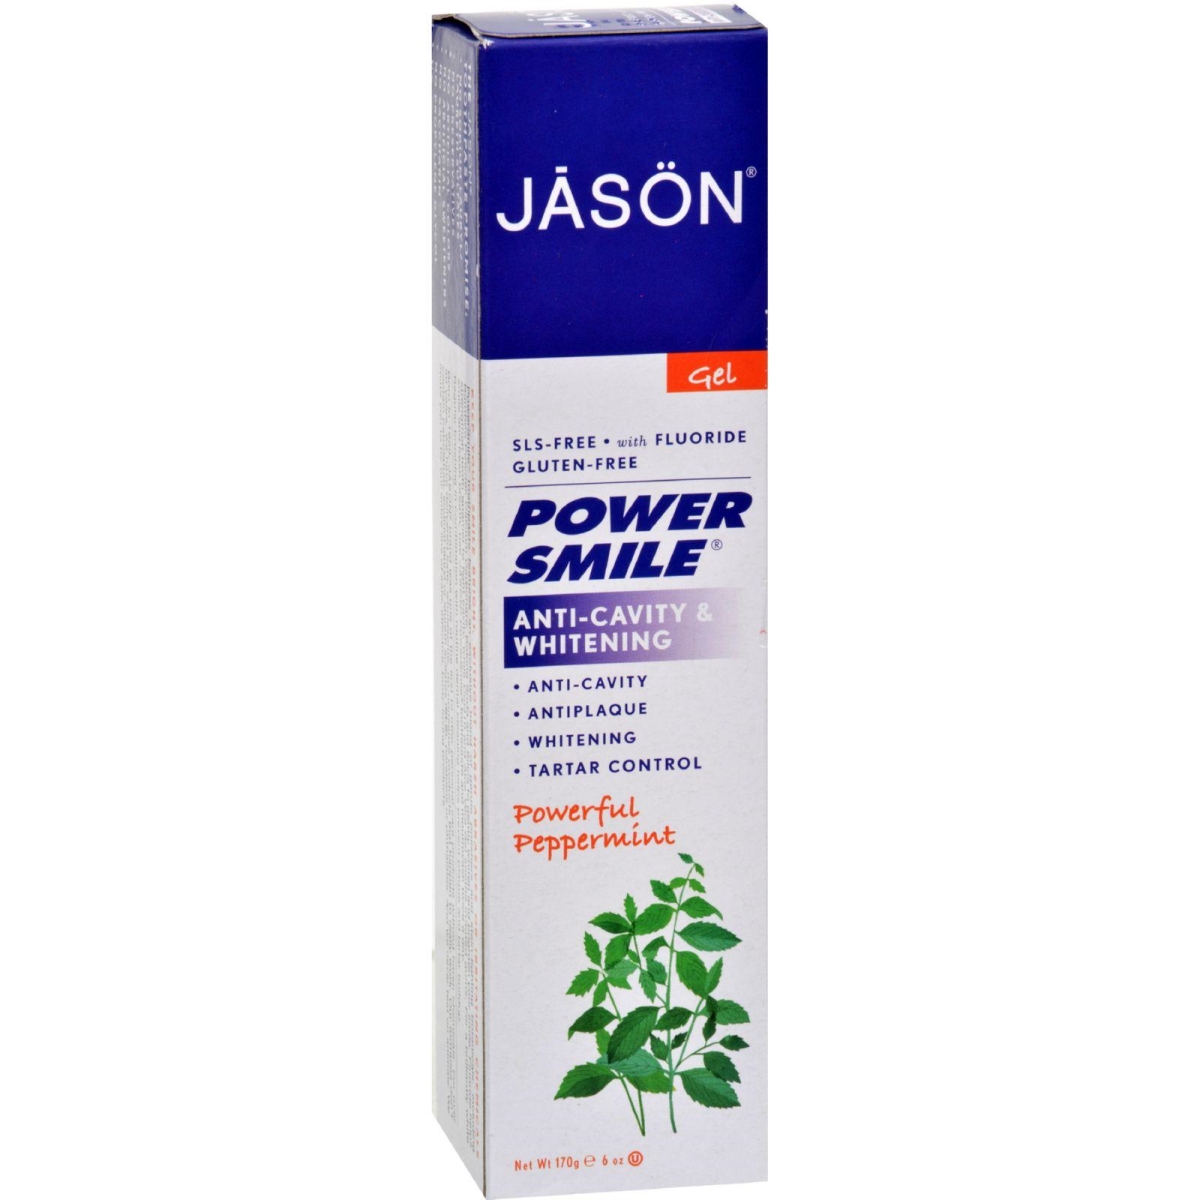 Products Hg0184390 6 Oz Powersmile All Natural Whitening Coq10 Tooth Gel